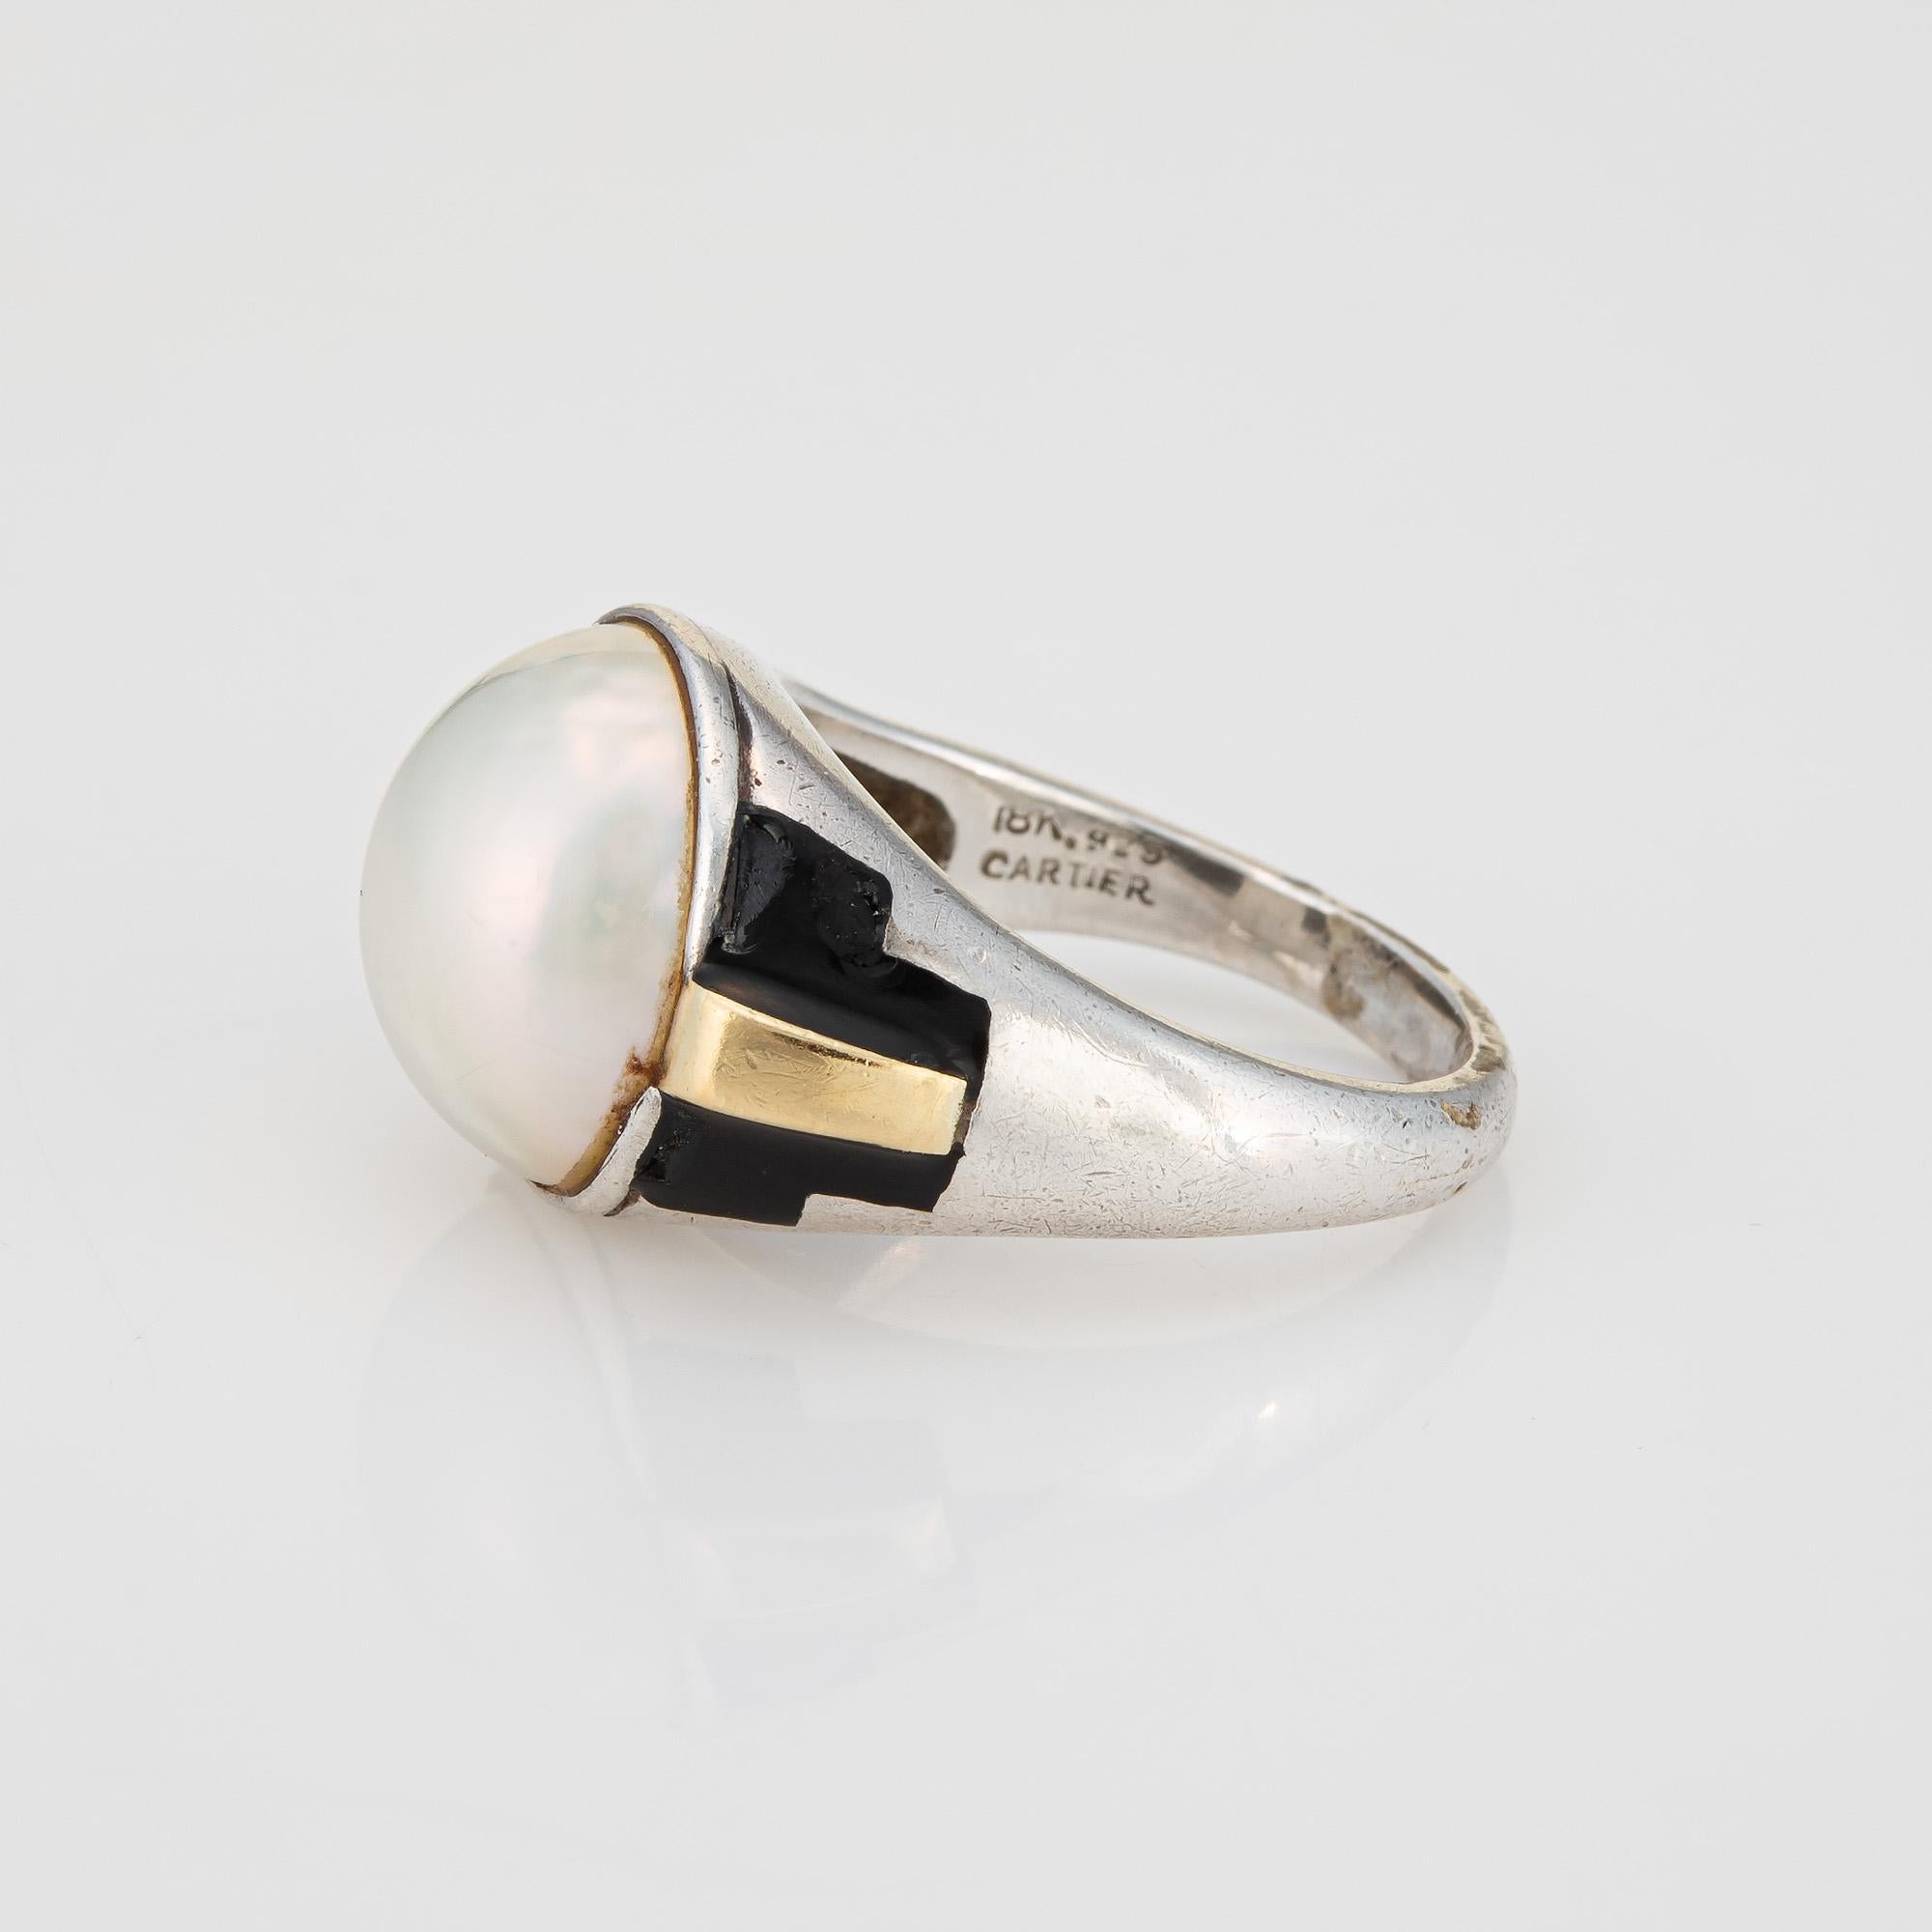 Round Cut Vintage 70s Cartier Ring 6.5 Sterling Silver 18k Gold Mabe Pearl Signed Jewelry